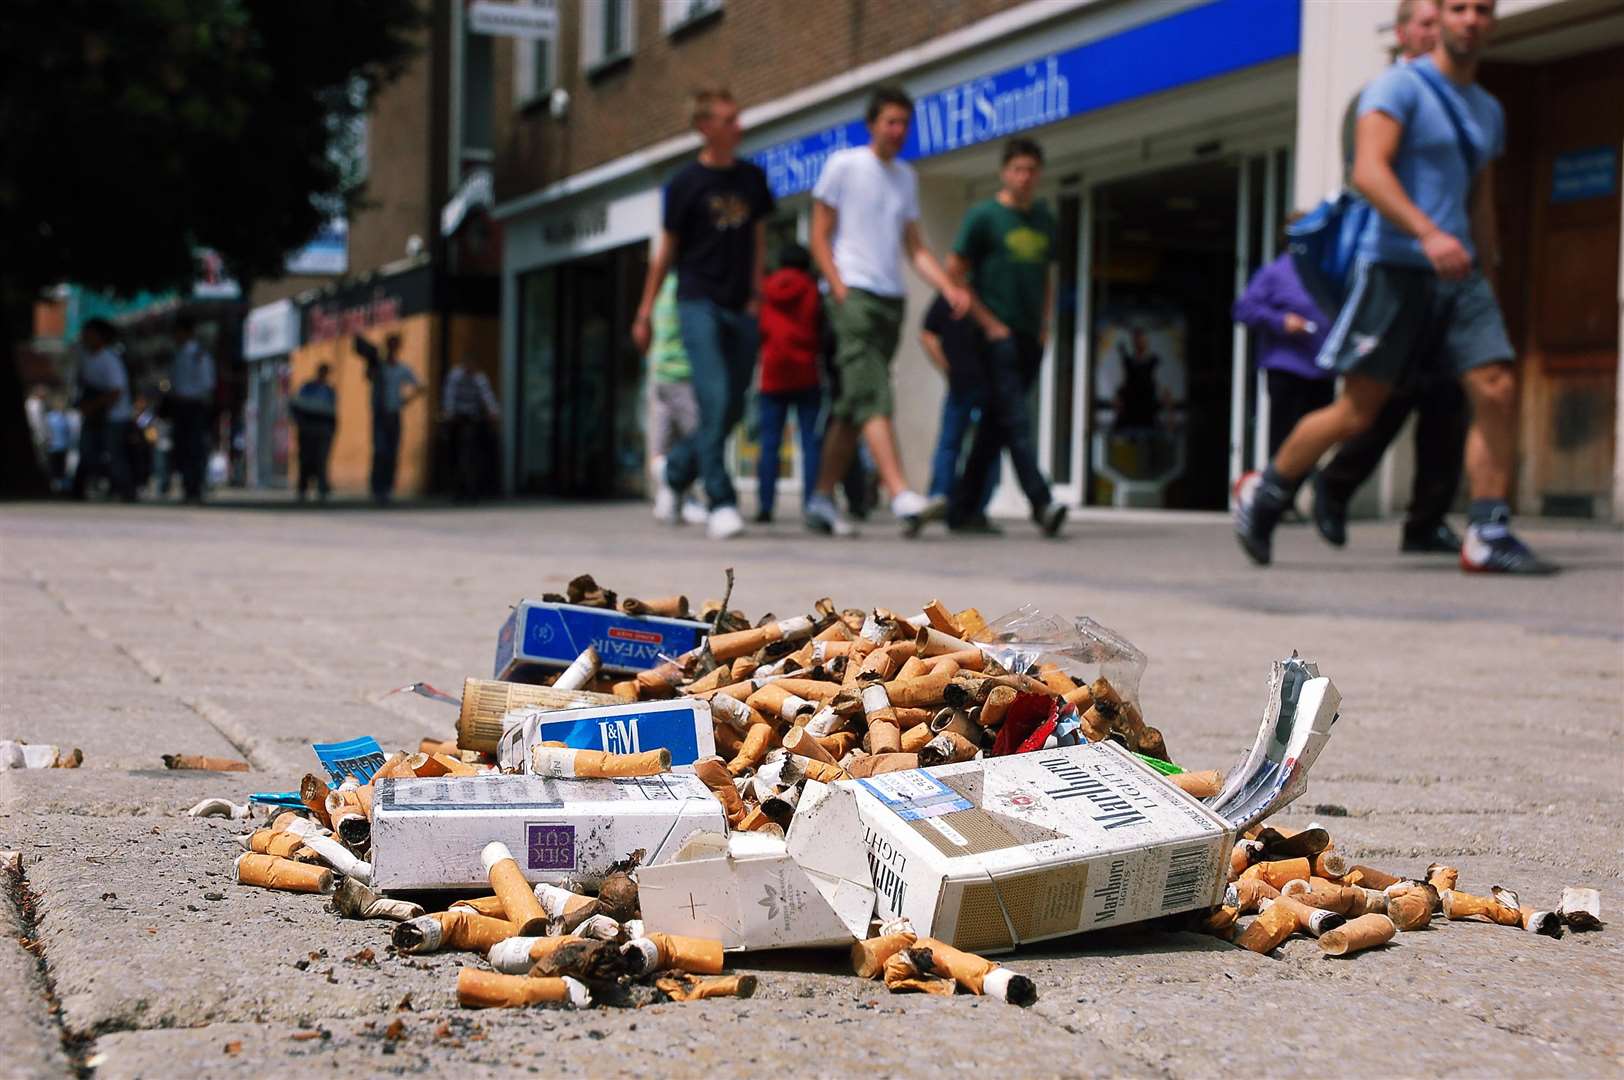 The council is clamping down on cigarette dumpers